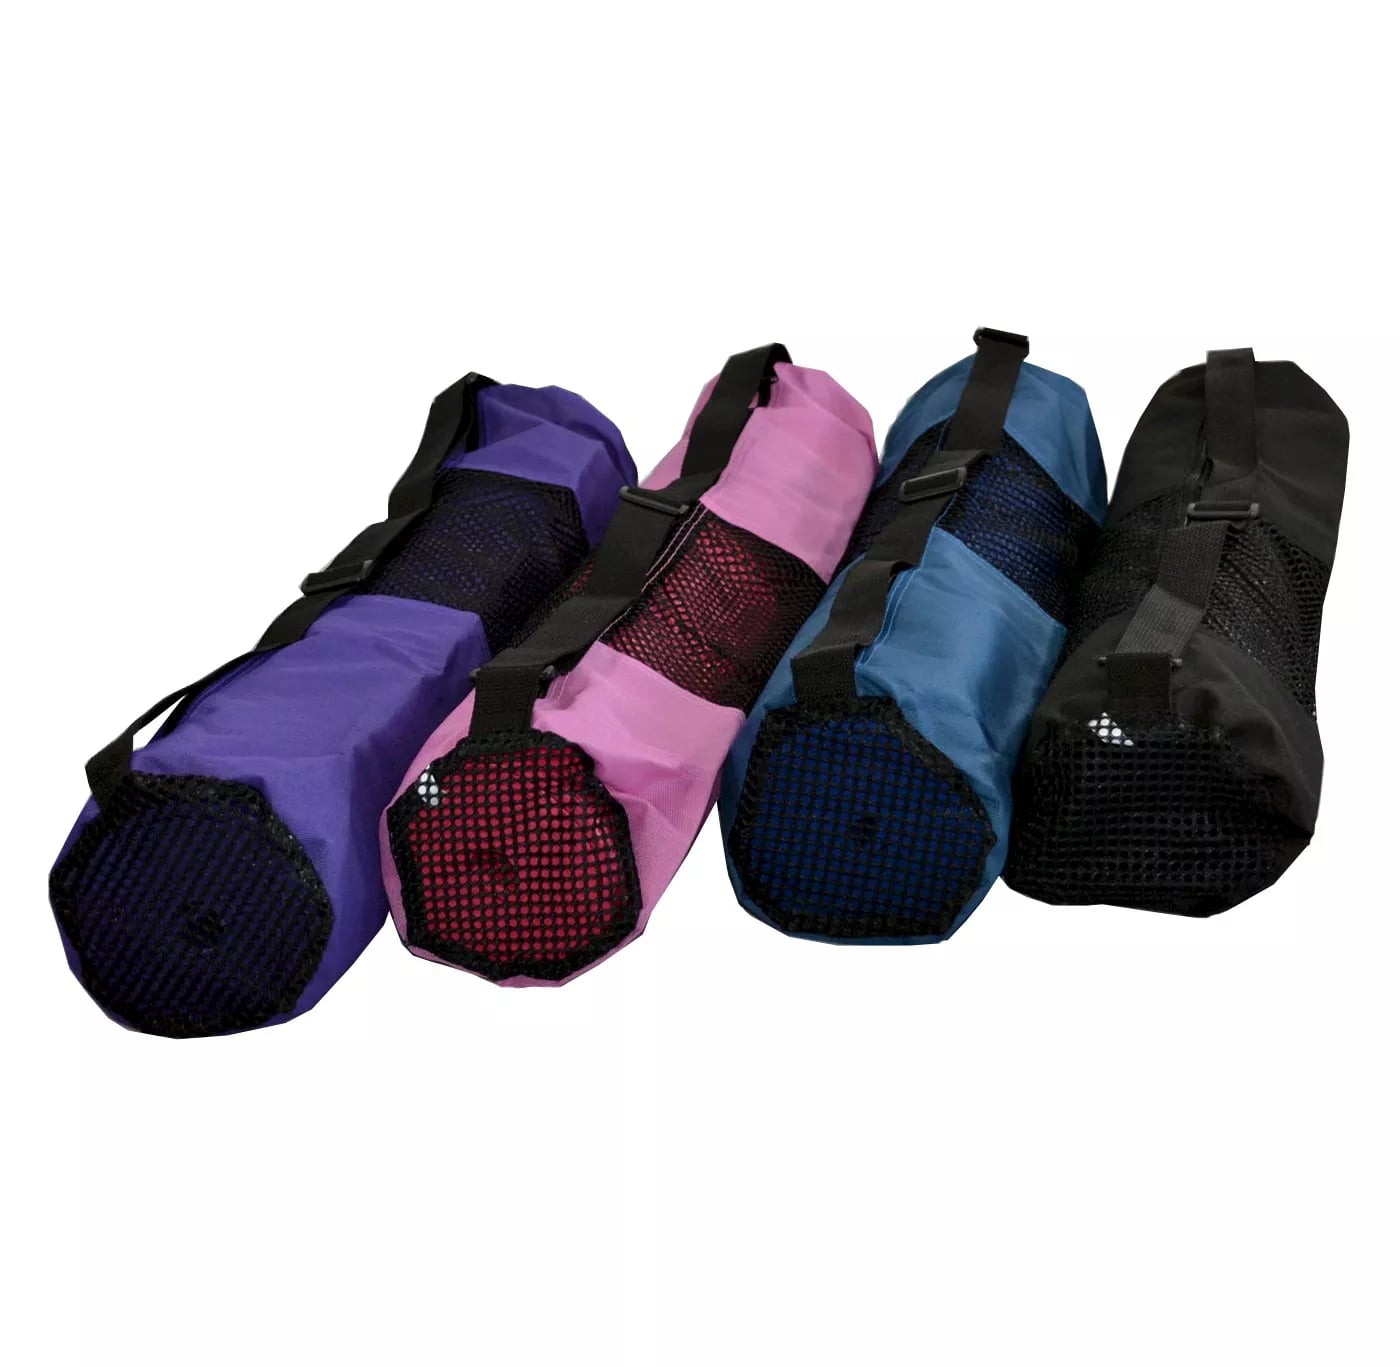 See Feel Yoga-Mat Bag, 15 Yoga-Mat Bags That Make It Easier to Show Up to  Every Class